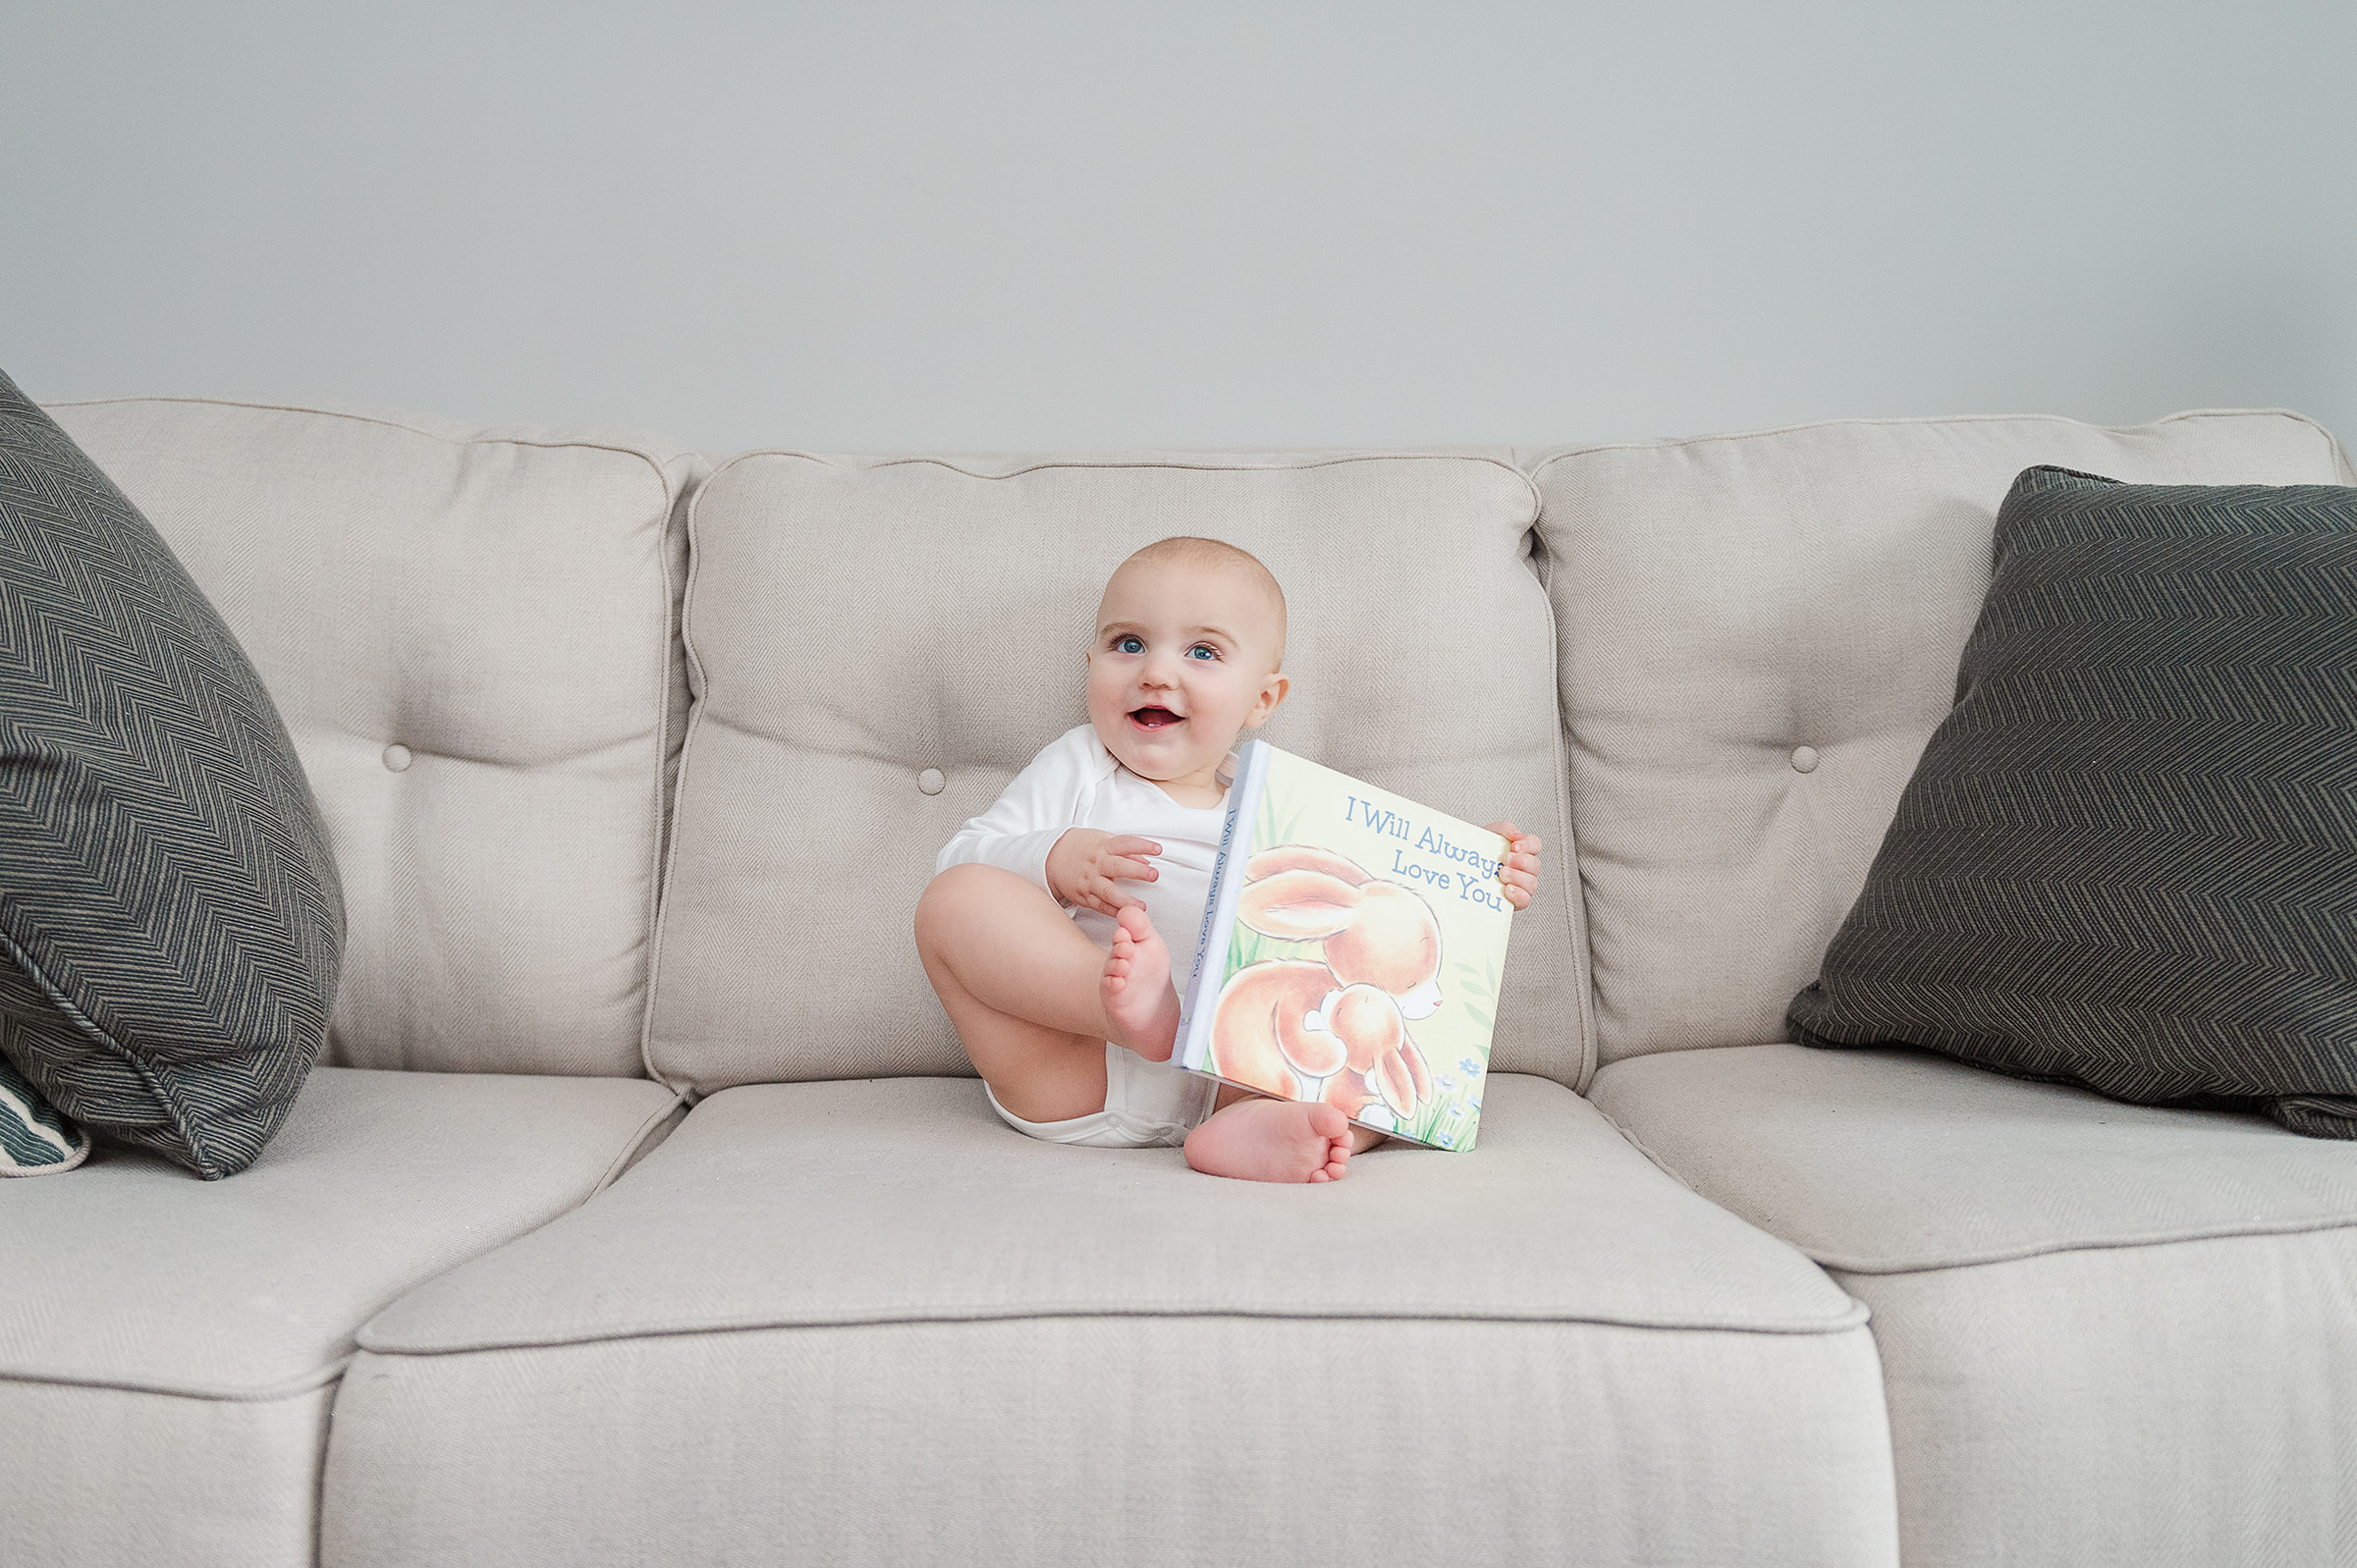 9 month old sitting on the couch with a book